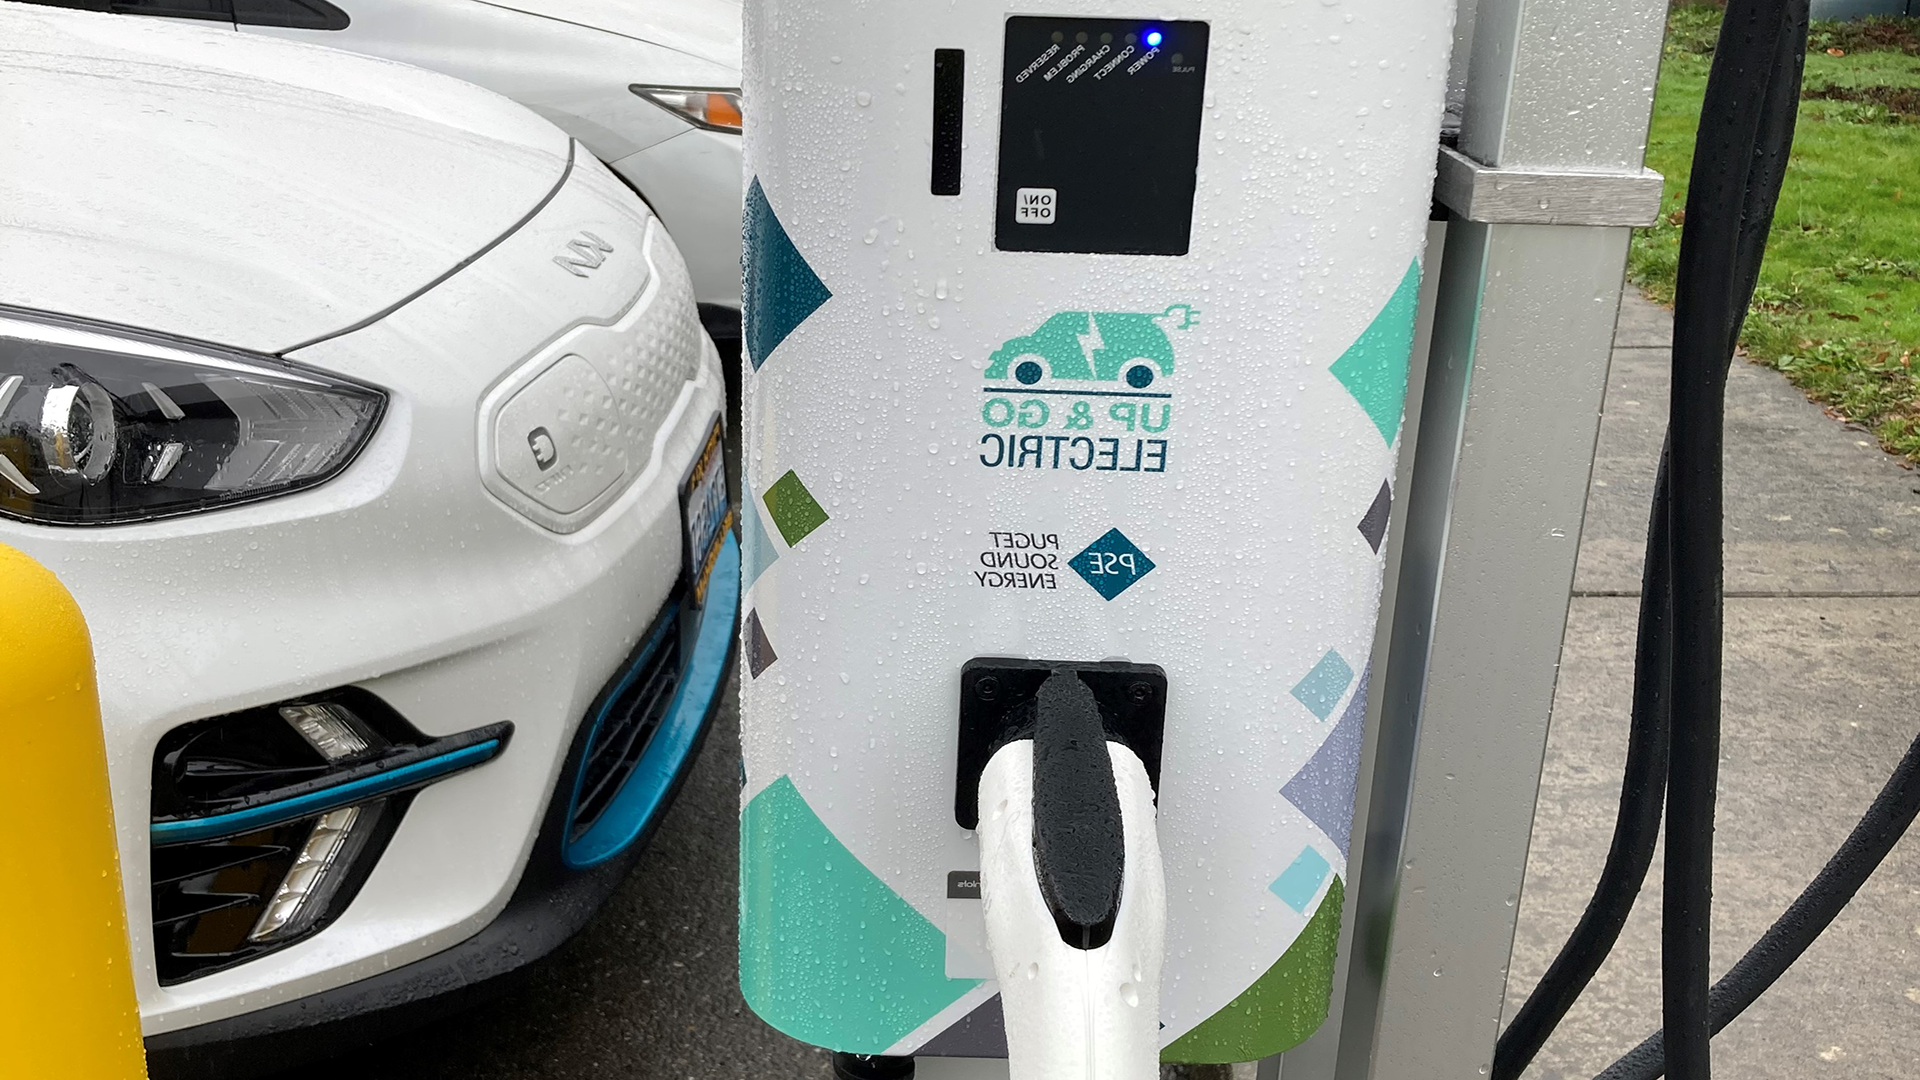 An electric vehicle charger installed at the Housing Authority of Skagit County through our Equity Focused pilot.